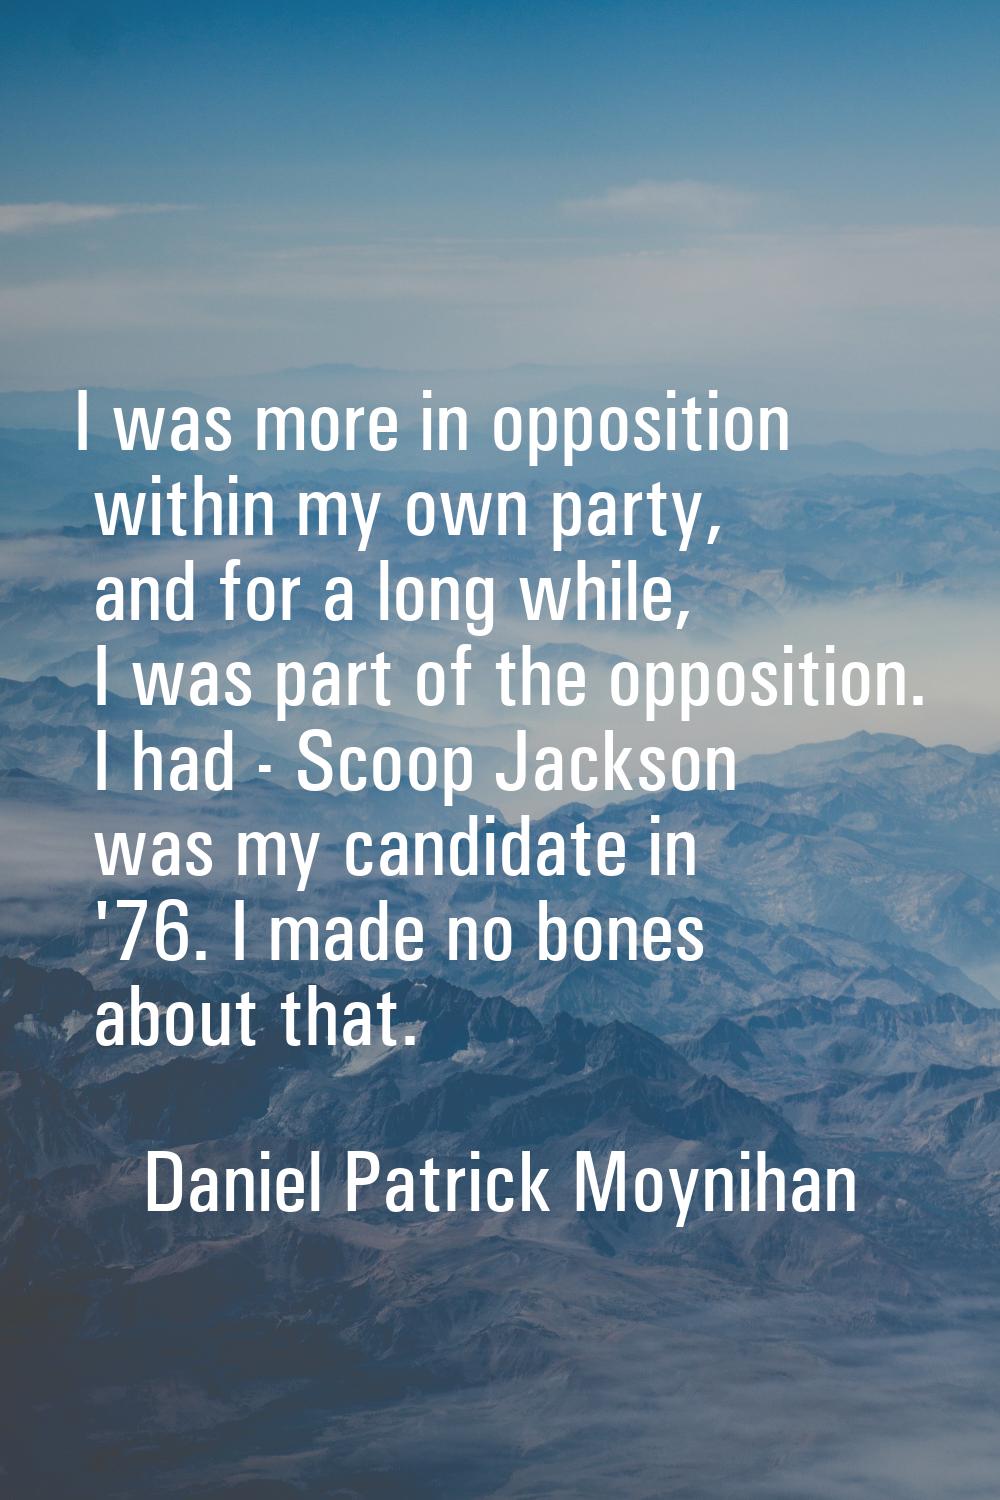 I was more in opposition within my own party, and for a long while, I was part of the opposition. I